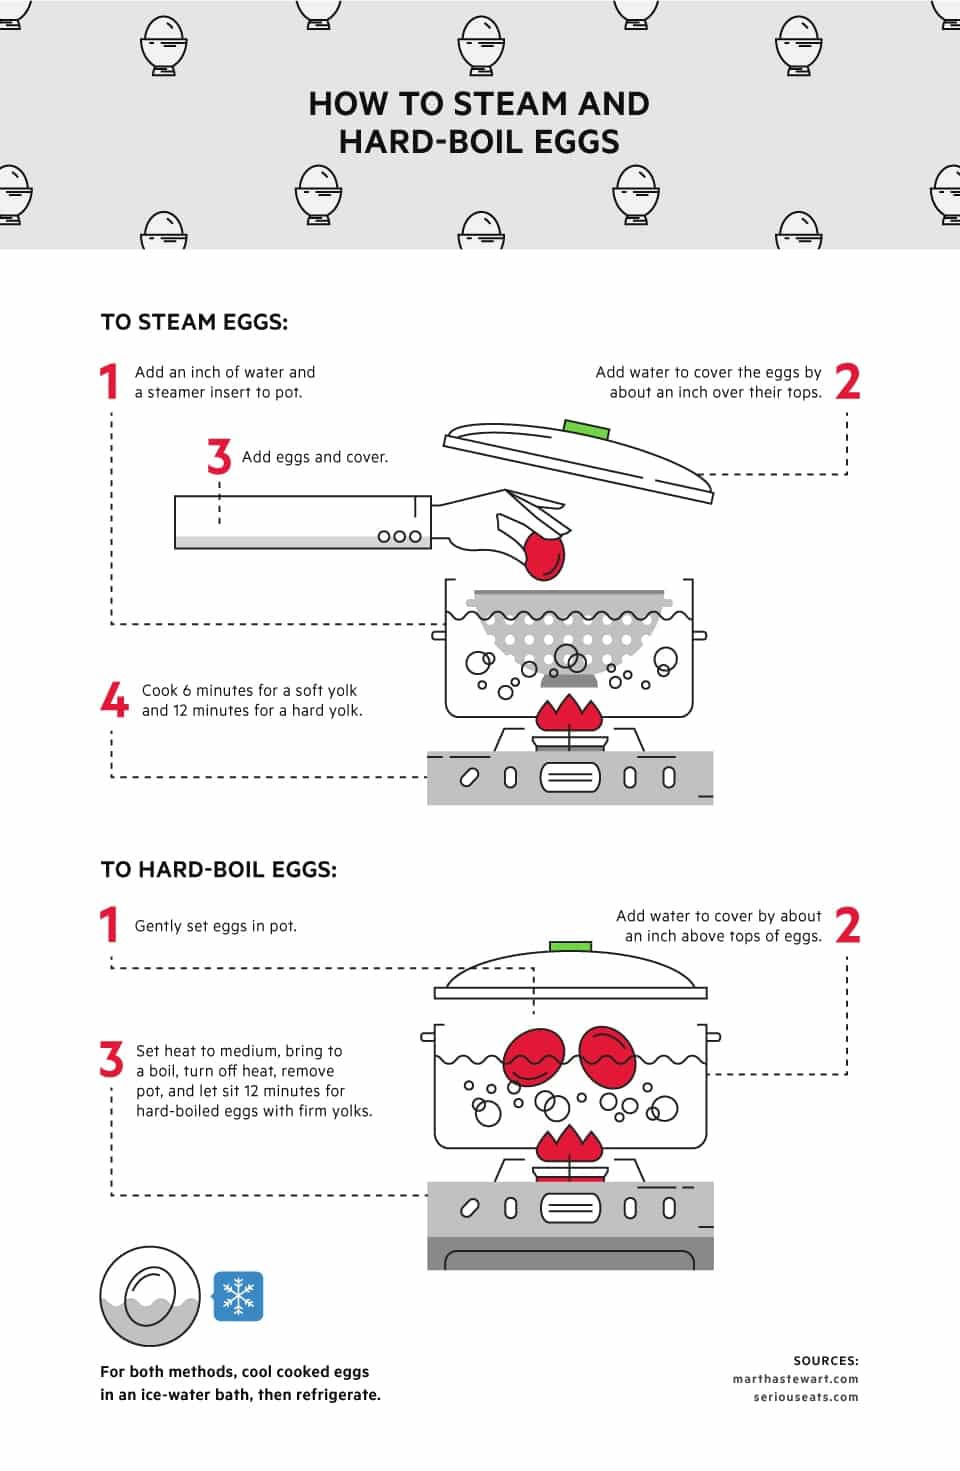 How to Steam and Hard-Boil Eggs